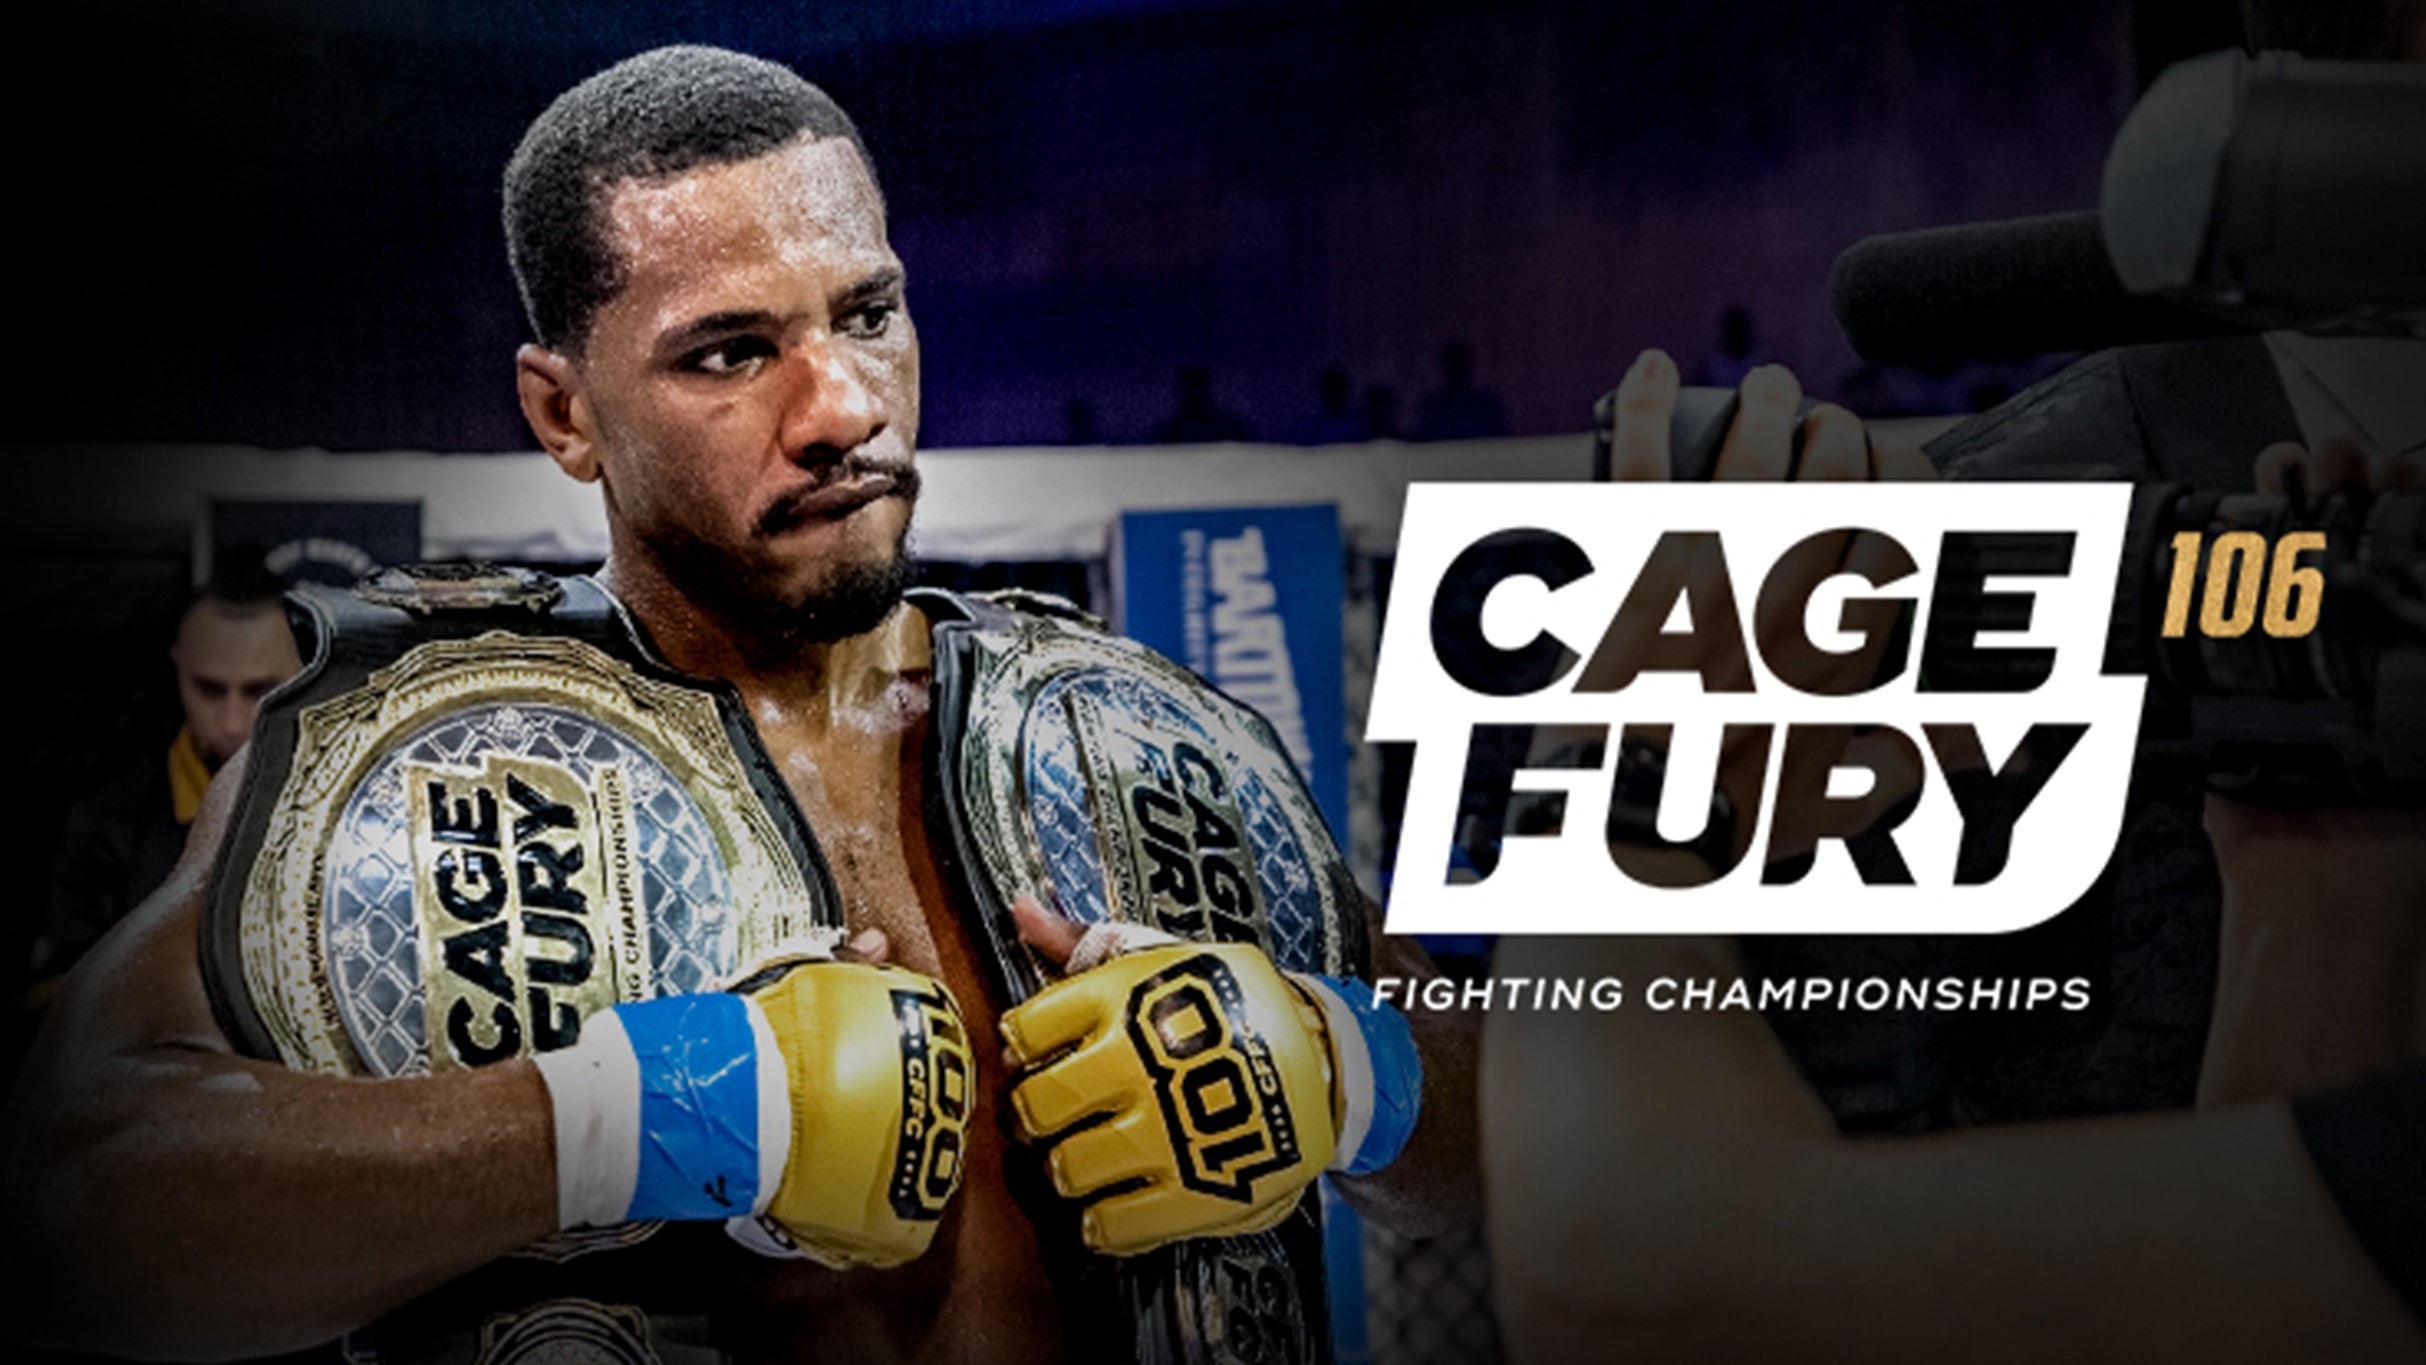 Cage Fury Fighting Championships at Boeing Center at Tech Port – San Antonio, TX